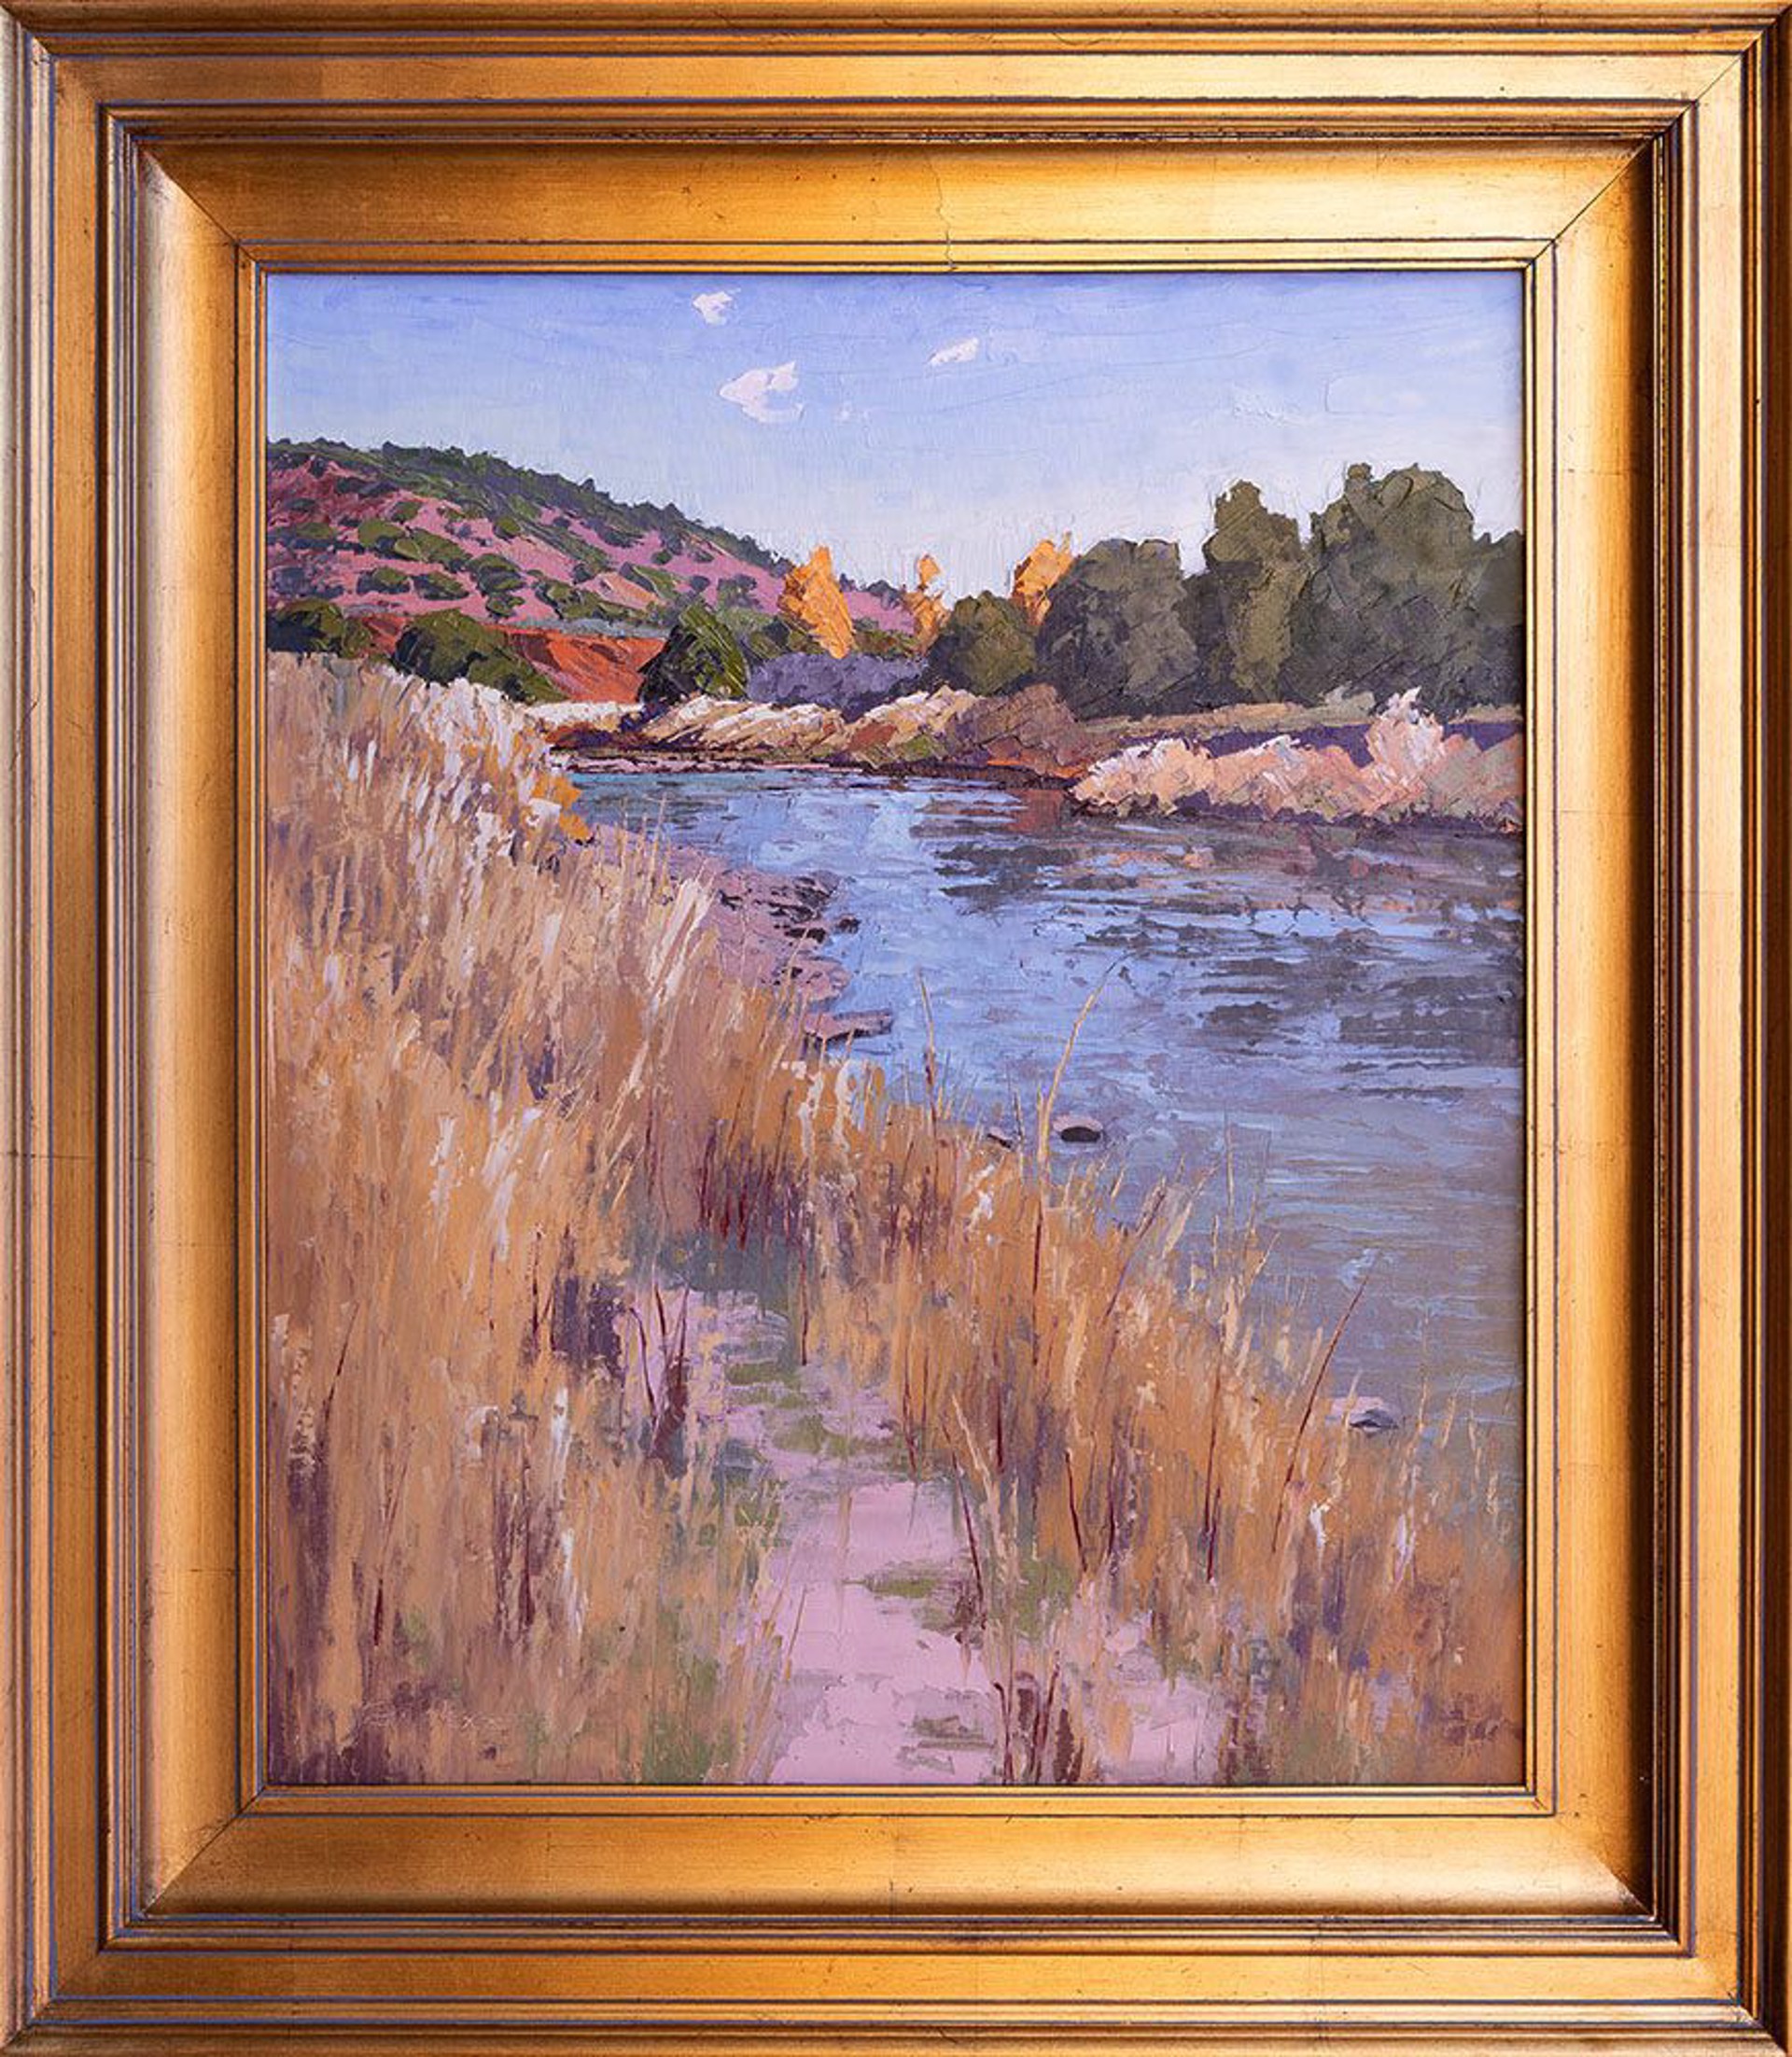 Banks of the Rio Chama by Ken Daggett